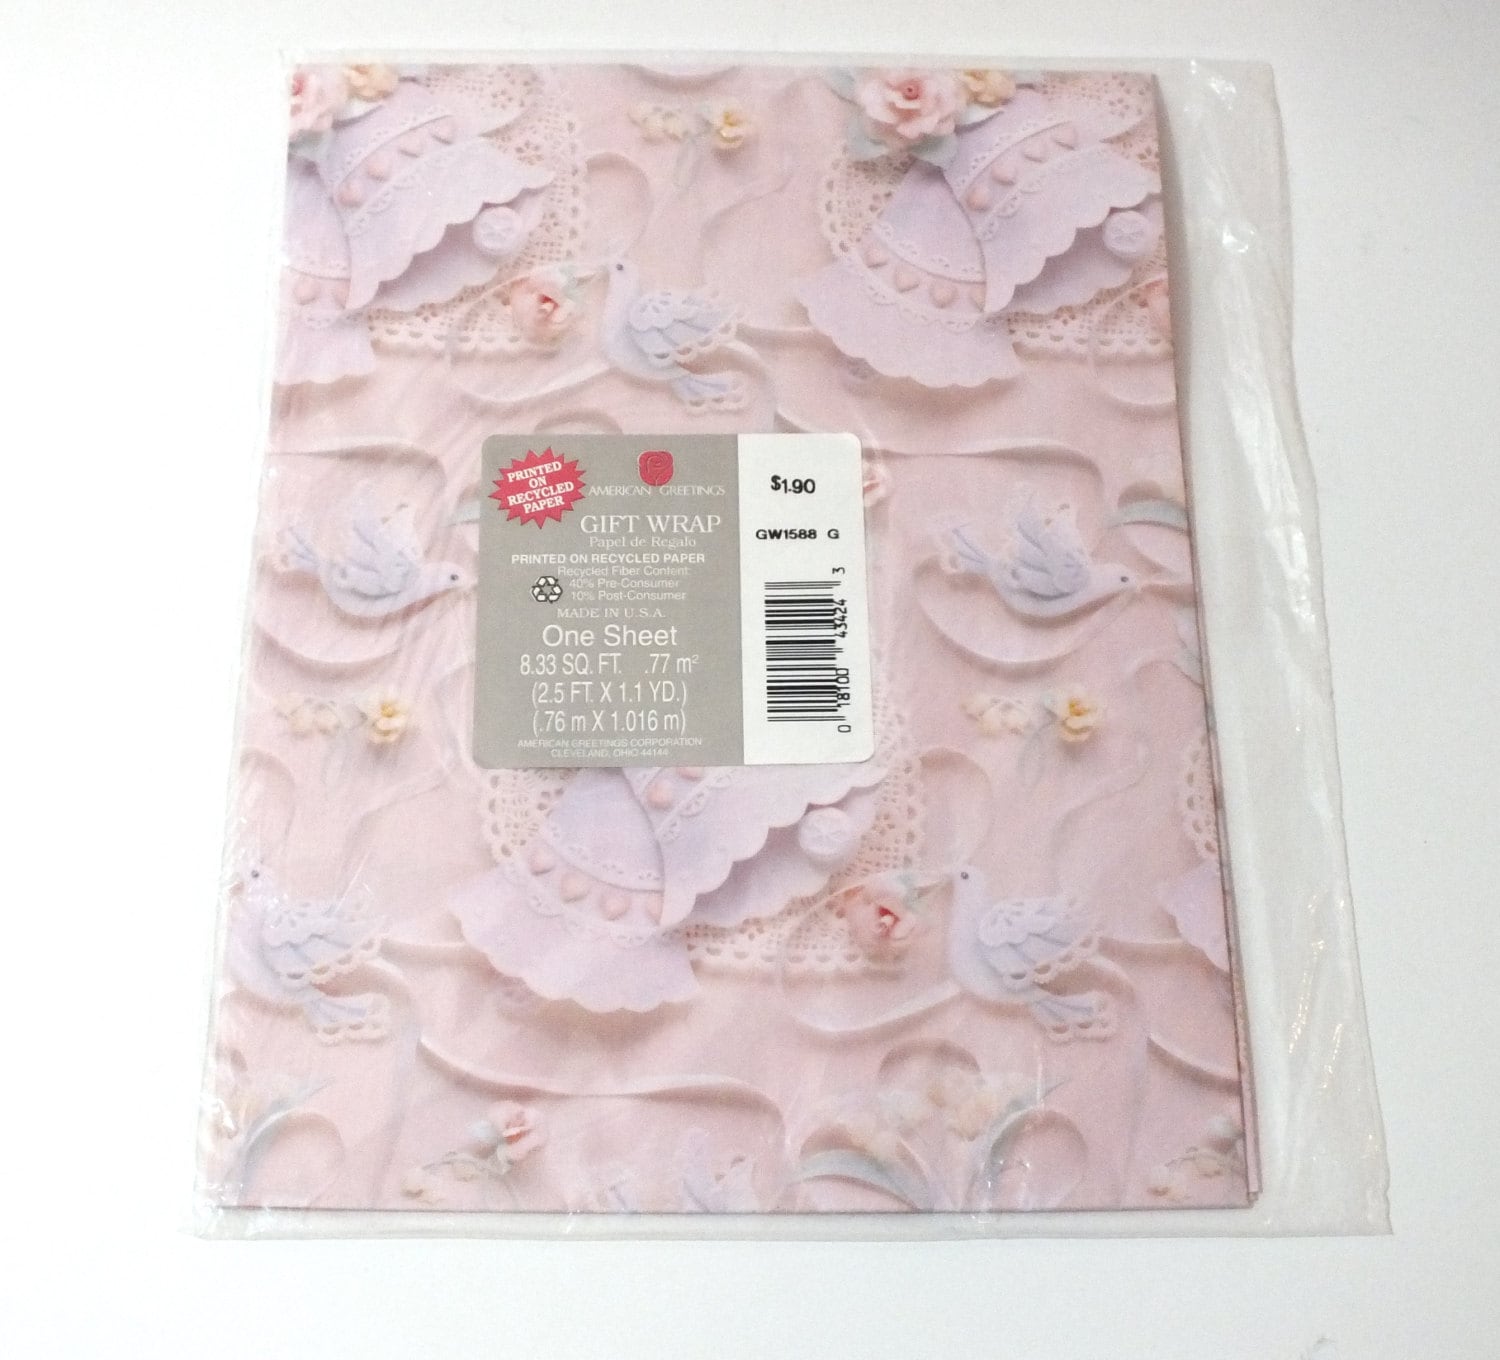 Vintage Hallmark Bridal Shower Gift Wrap NOS Wrapping Paper 2